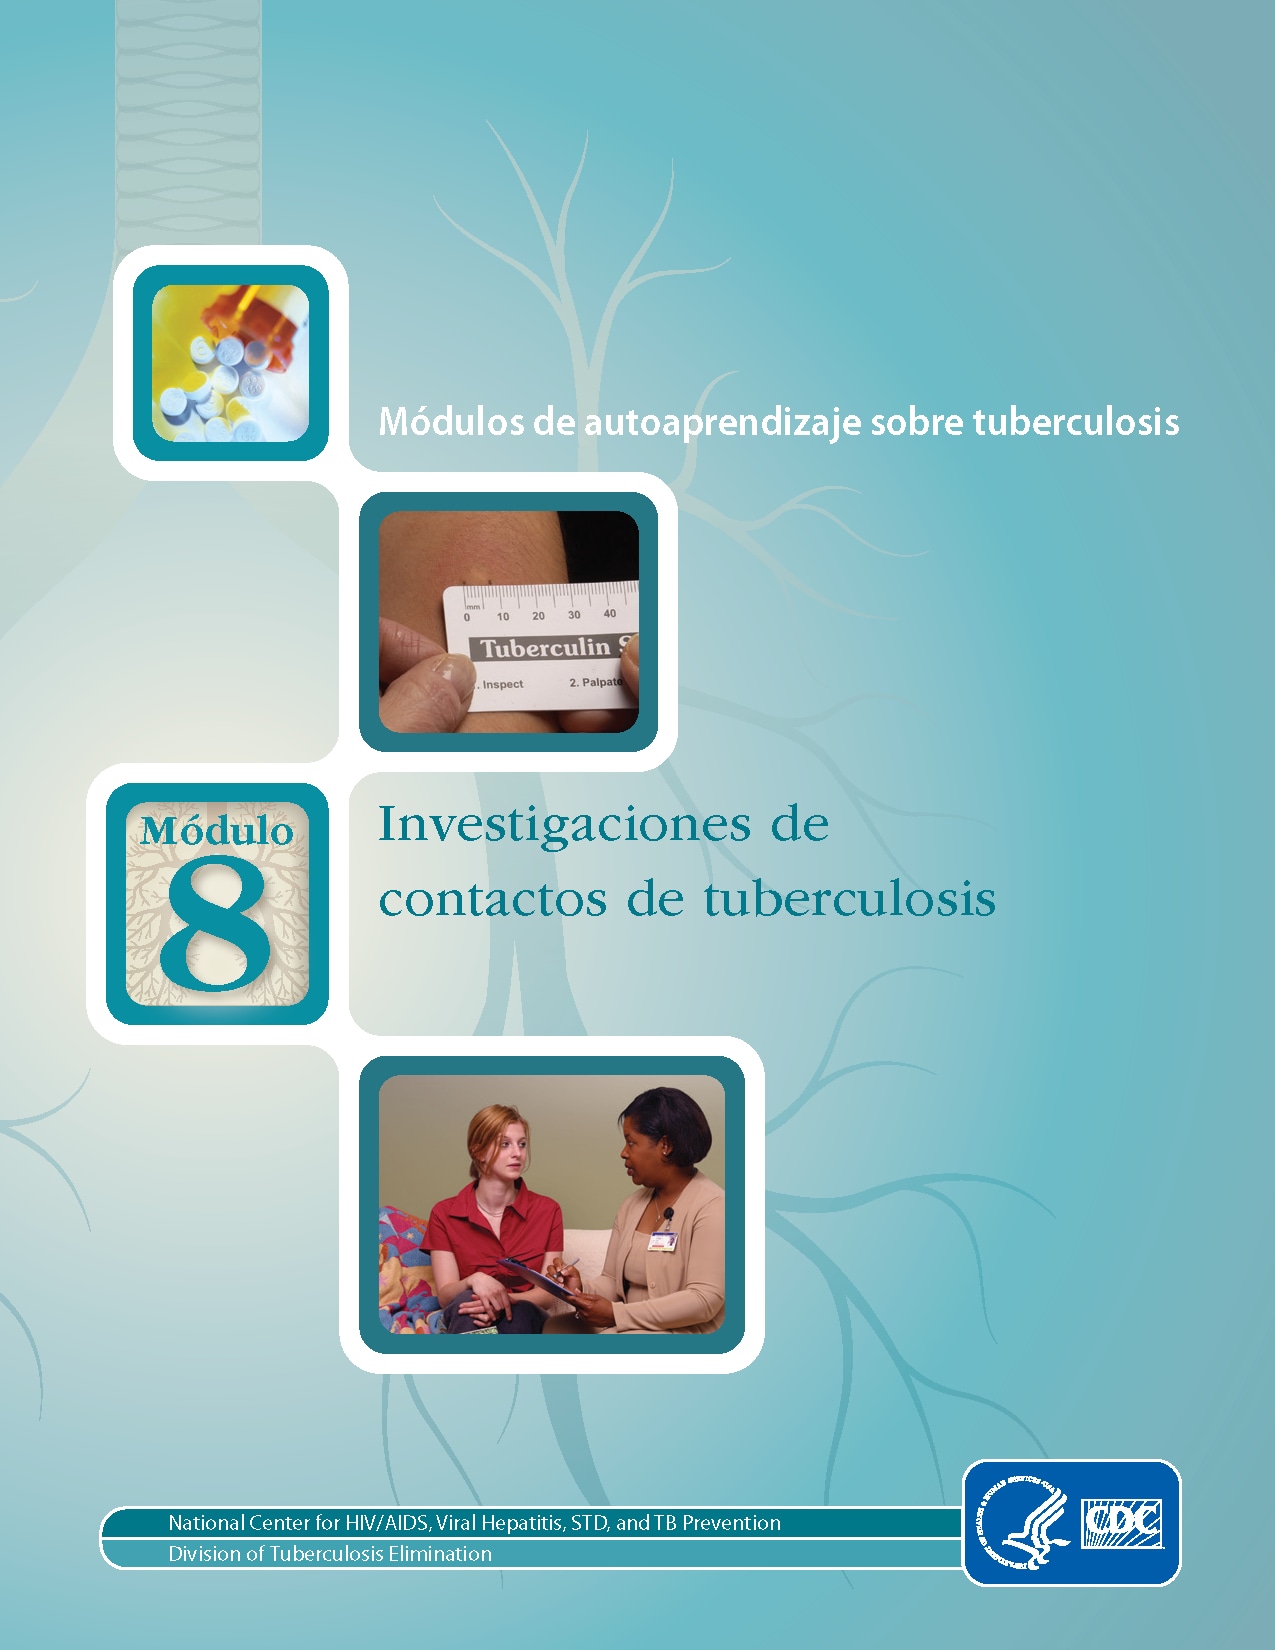 Self-Study Module 8: Contact Investigations for Tuberculosis Spanish